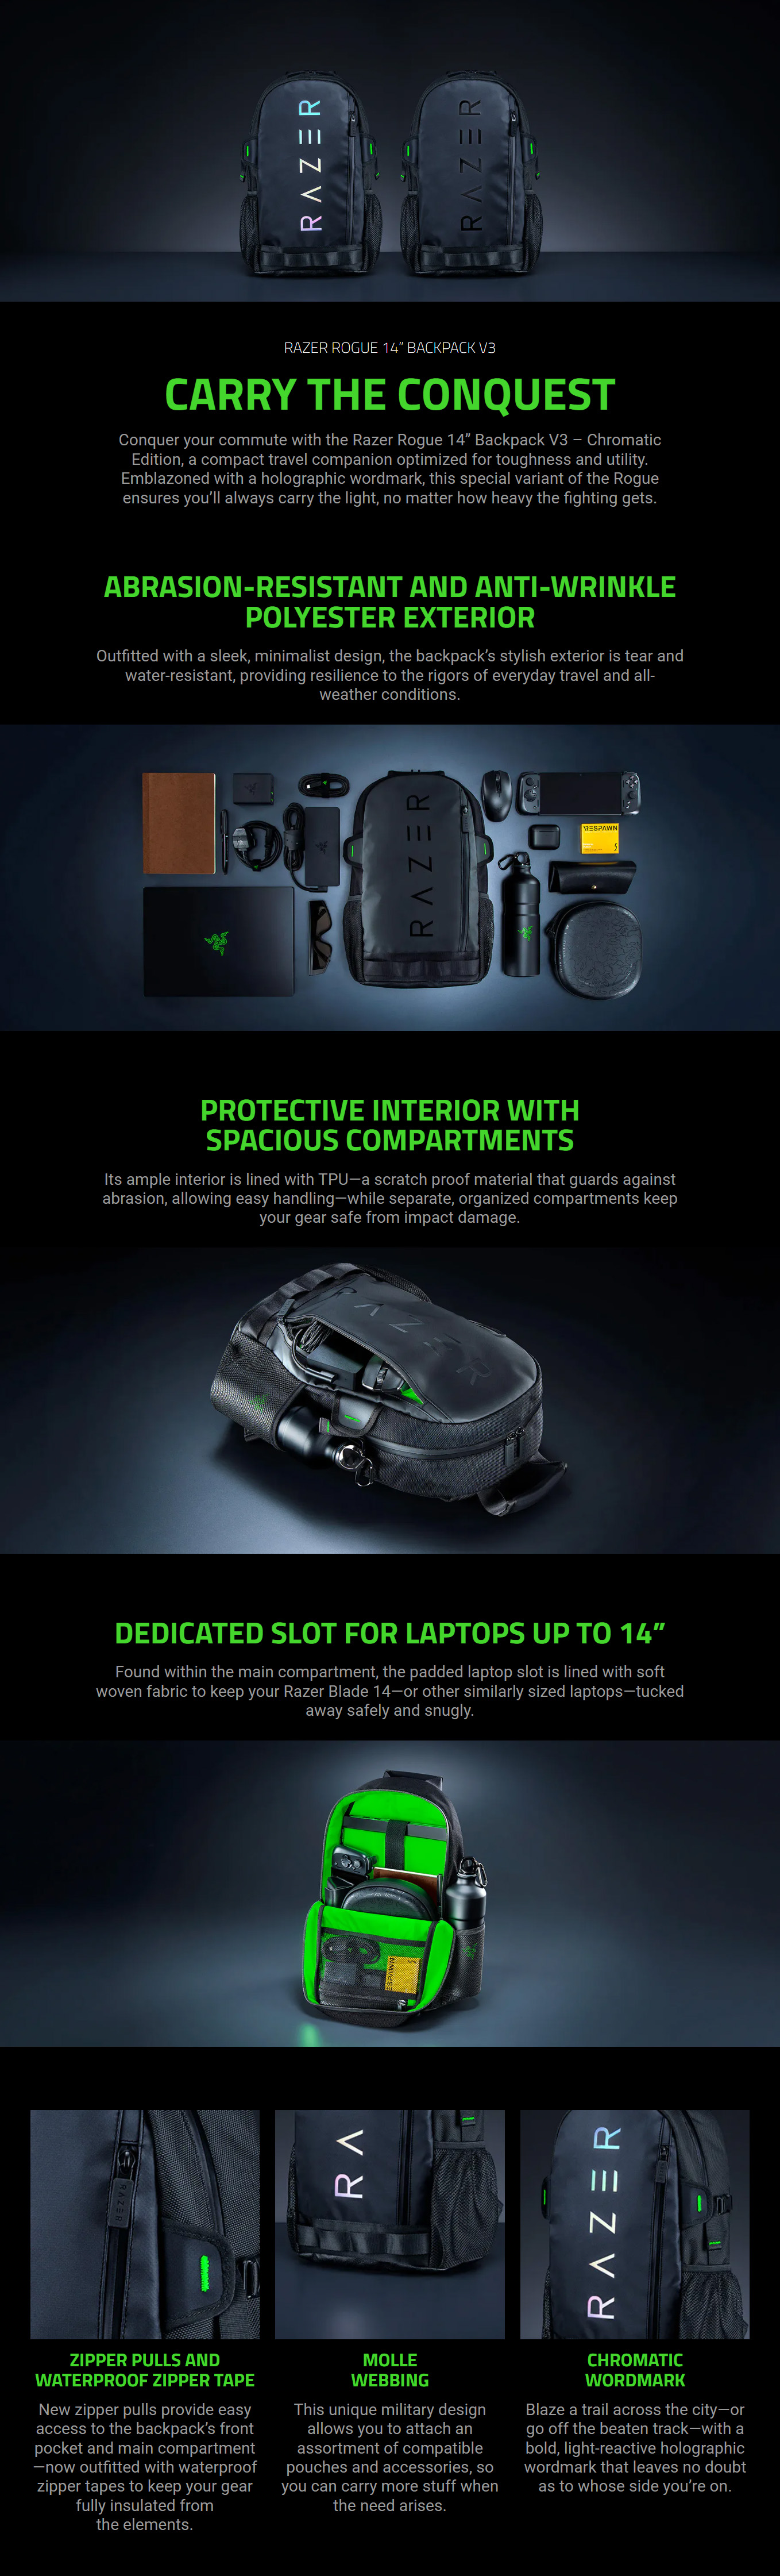 Laptop-Carry-Bags-Razer-Rogue-13in-Backpack-V3-Chromatic-Edition-RC81-03630116-0000-4